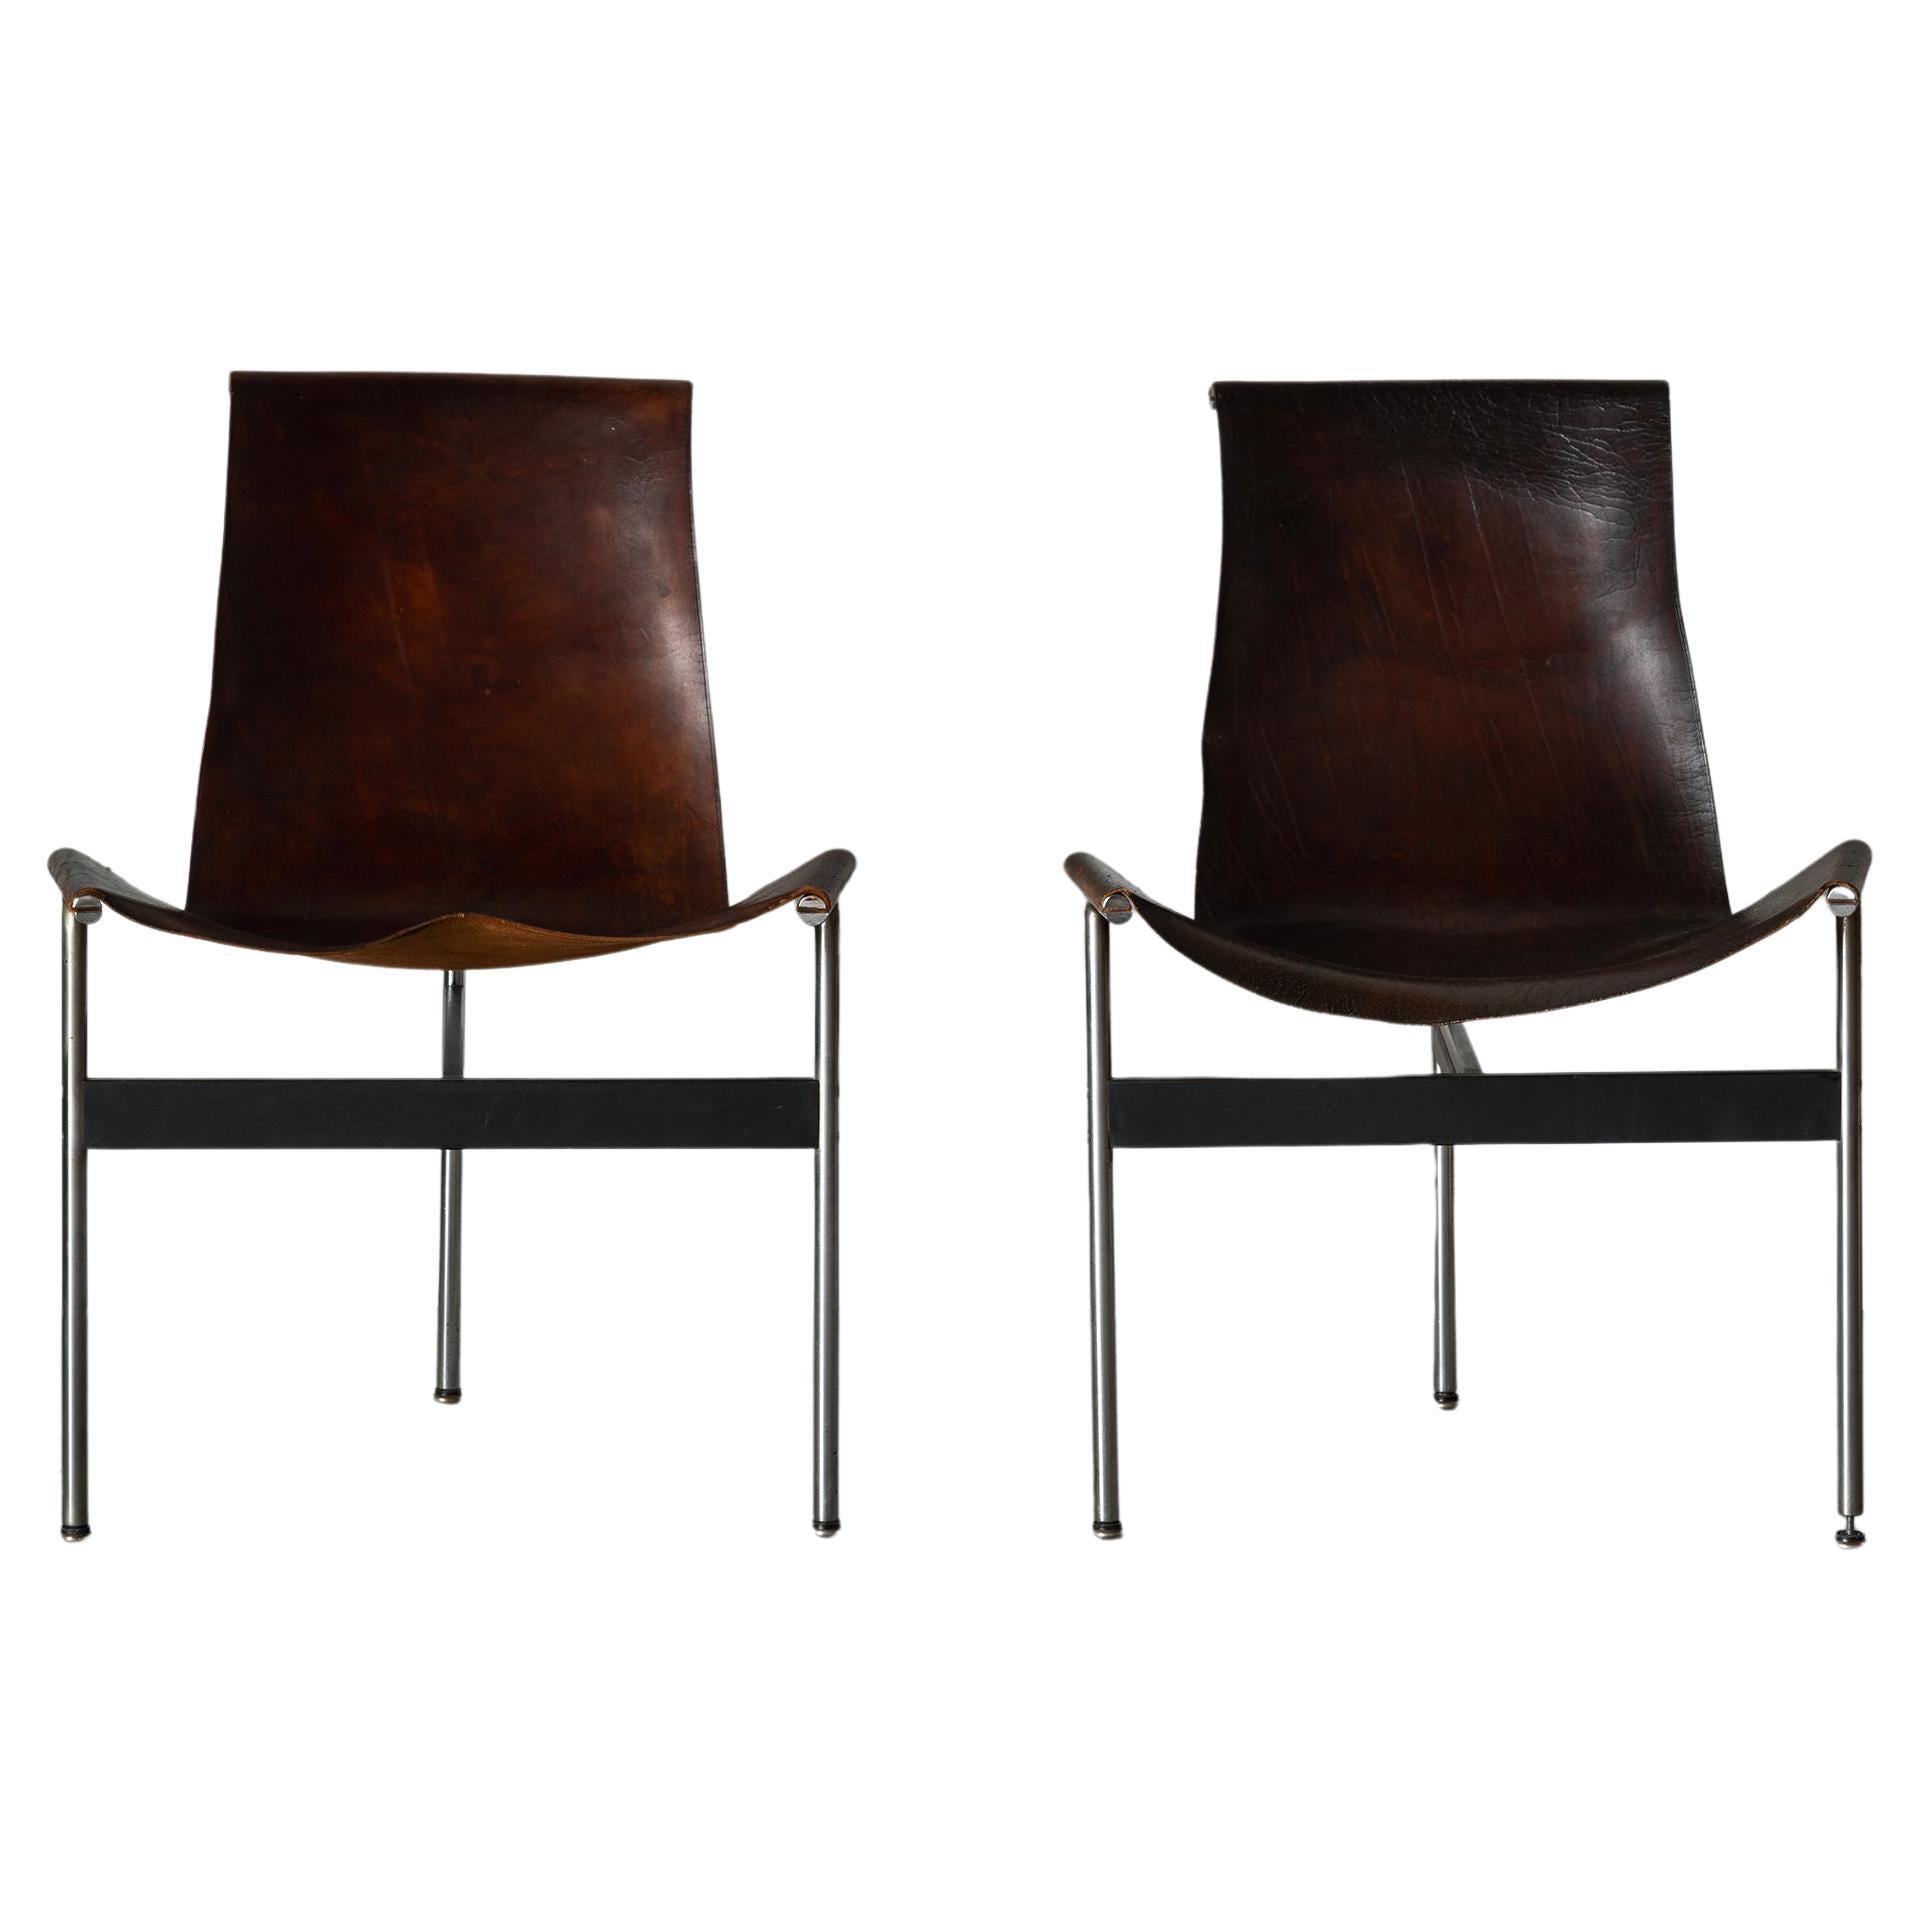 Pair of "T Chairs" by Katavolos, Littell and Kelley for Laverne International